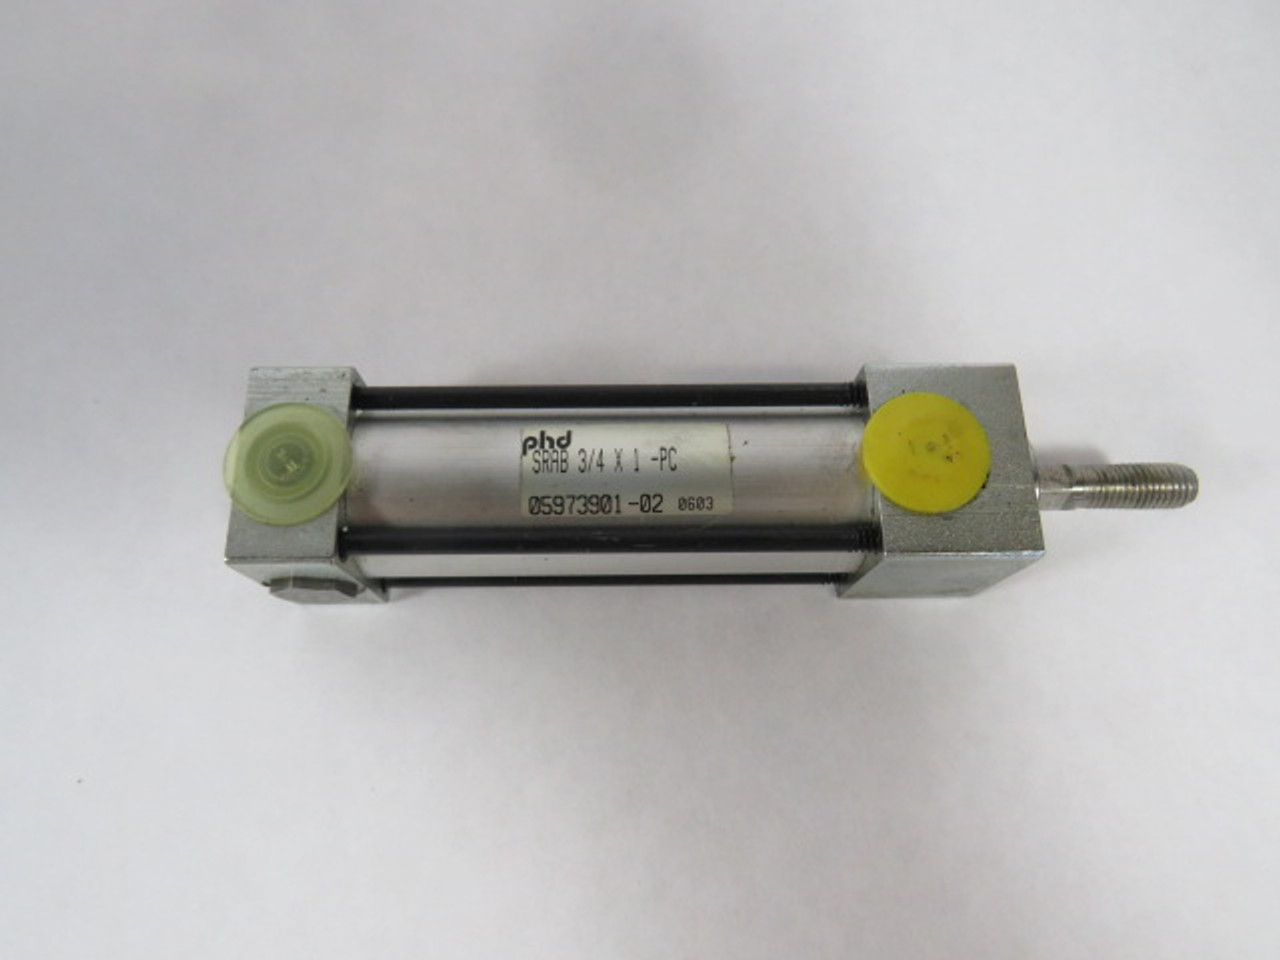 Phd SRAB3/4X1-PC Pneumatic Cylinder 3/4" Bore 1" Stroke USED